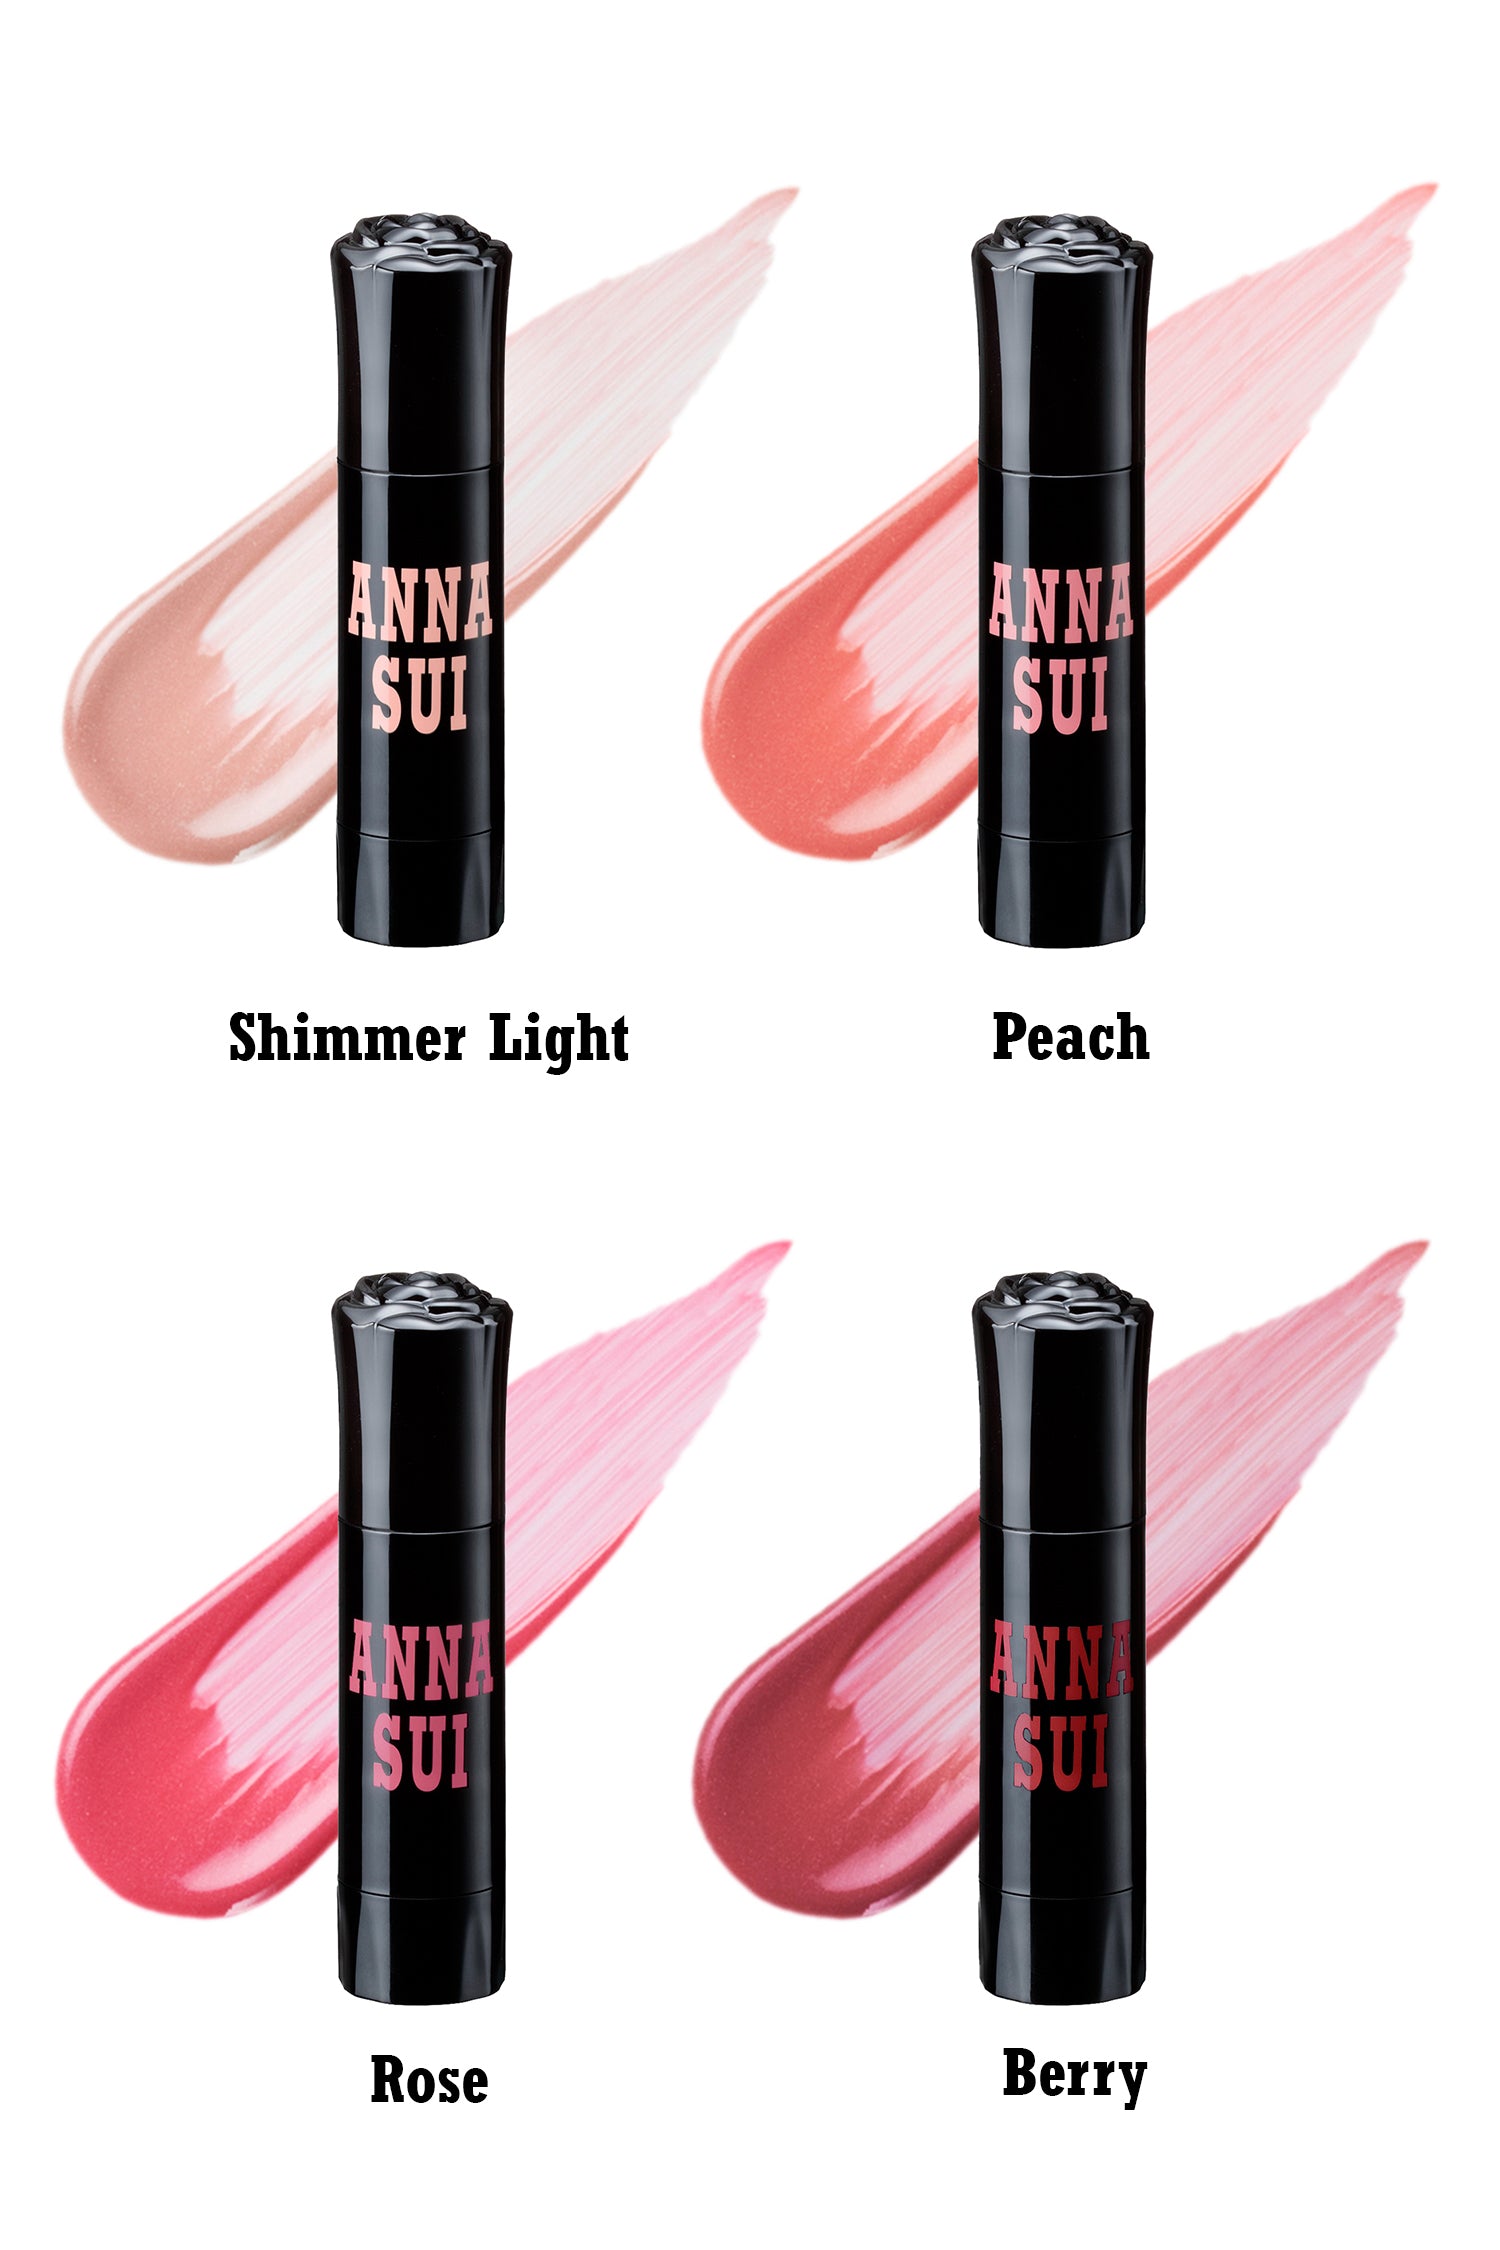 4 gradients of primer, SHIMMER/PEACH/ROSE/BERRY, cylinder match the gradient with fonts color